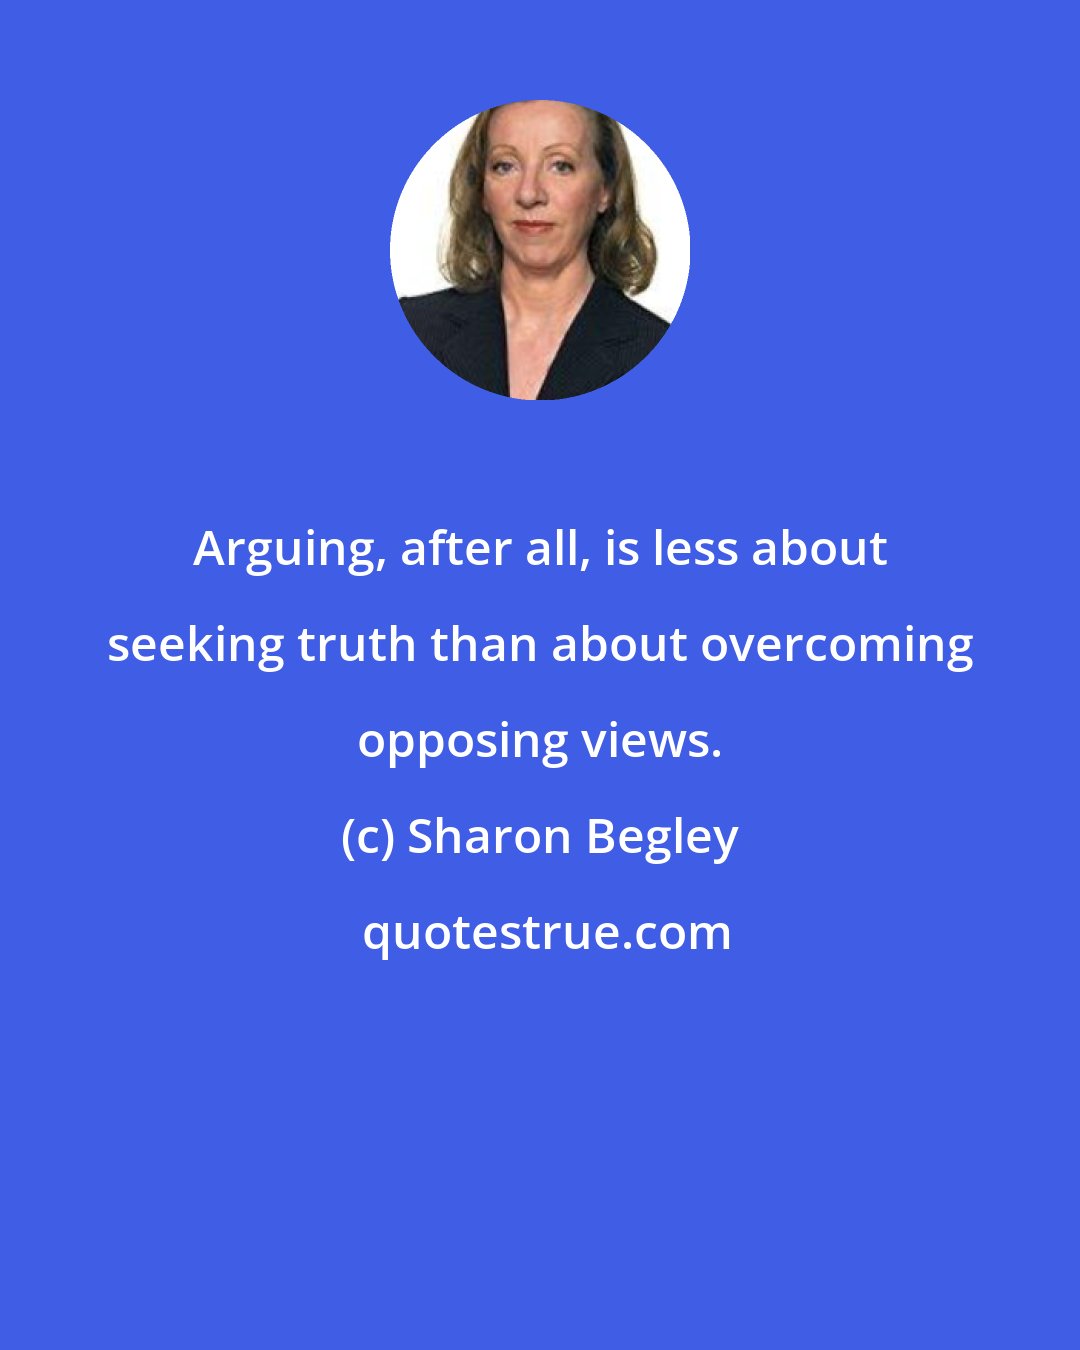 Sharon Begley: Arguing, after all, is less about seeking truth than about overcoming opposing views.